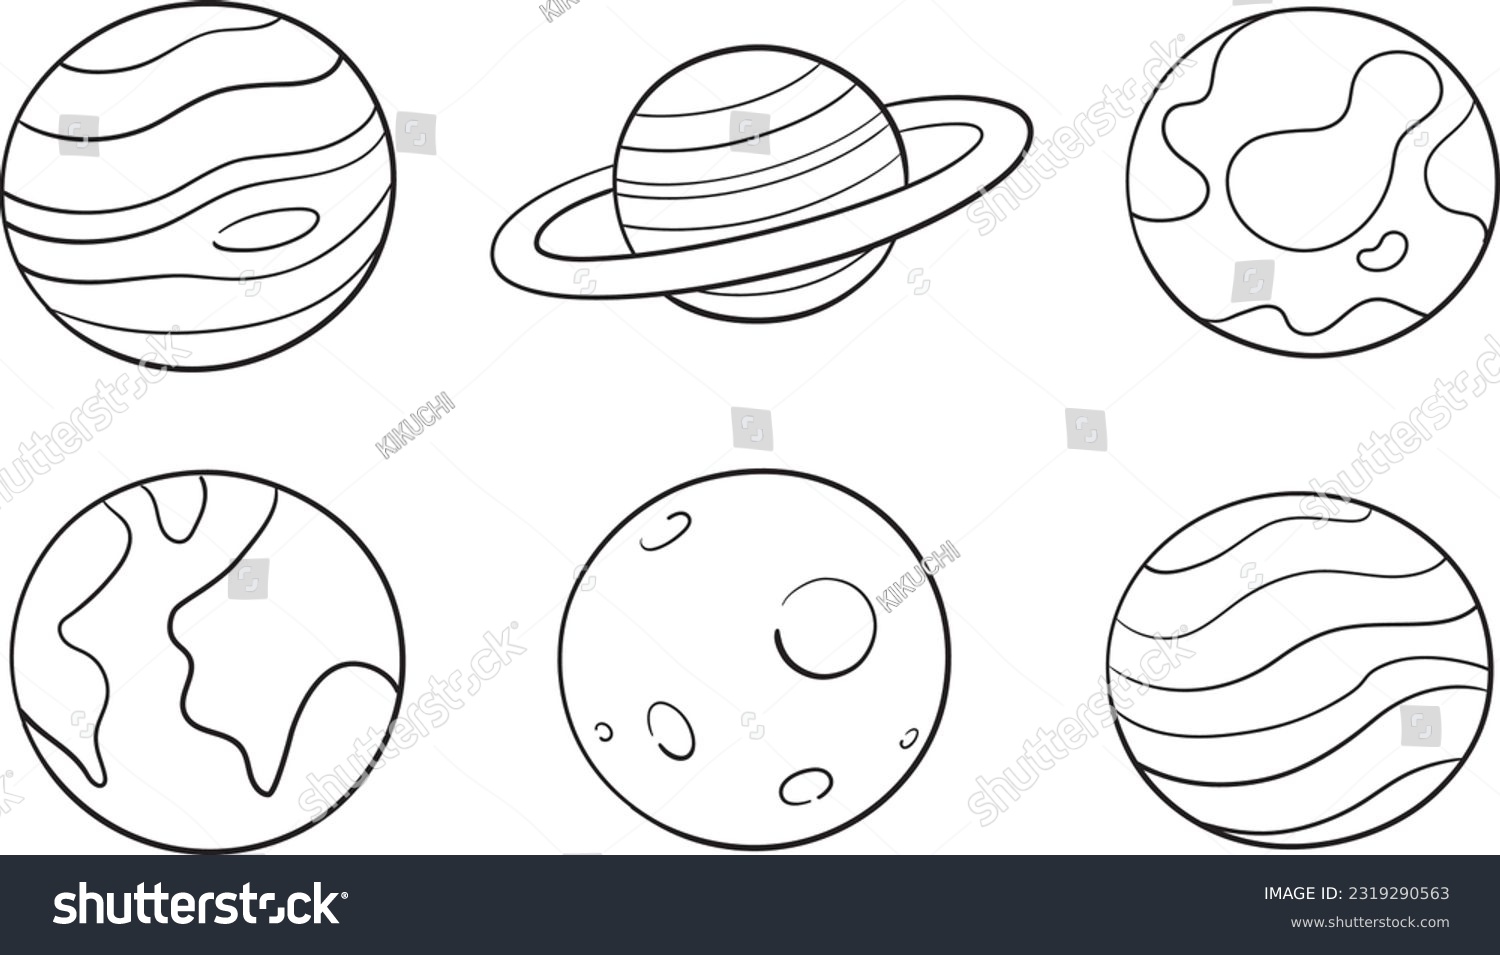 SVG of Cute planets education symbols drawing in doodle line art style. Vector illustration. Set of planets. Vector illustration in doodle style. Hand drawing. svg